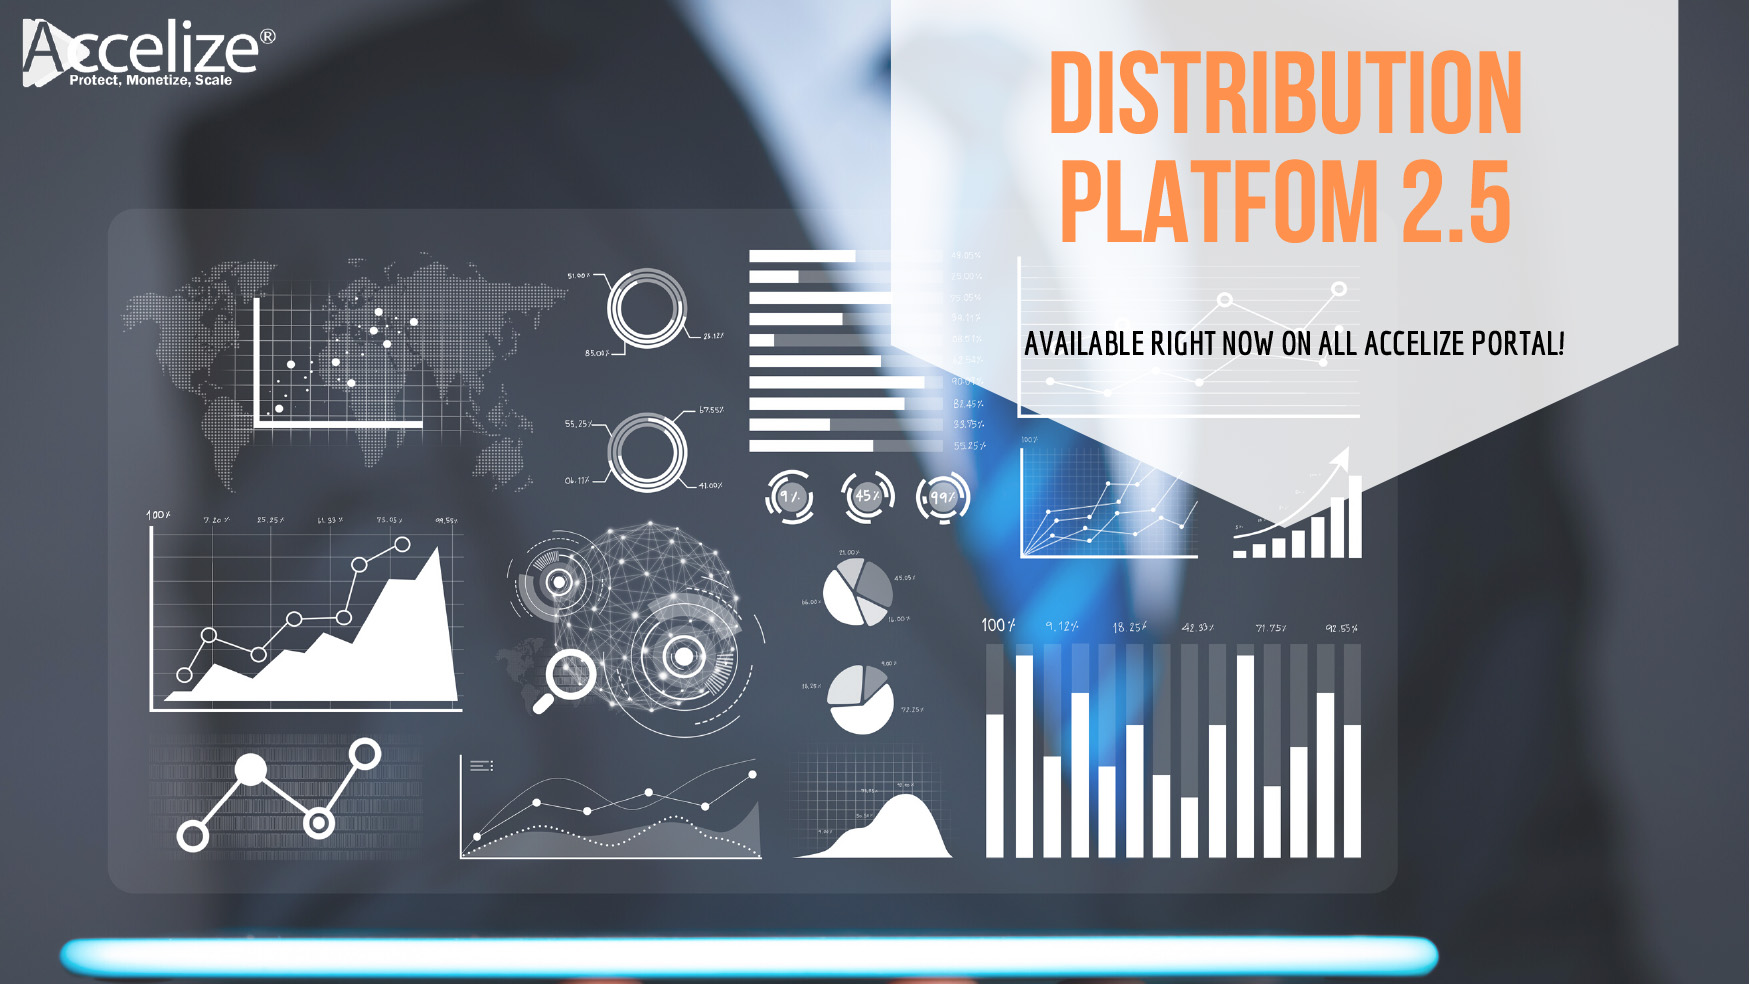 RELEASE: DISTRIBUTION PLATFORM 2.5 NOW AVAILABLE